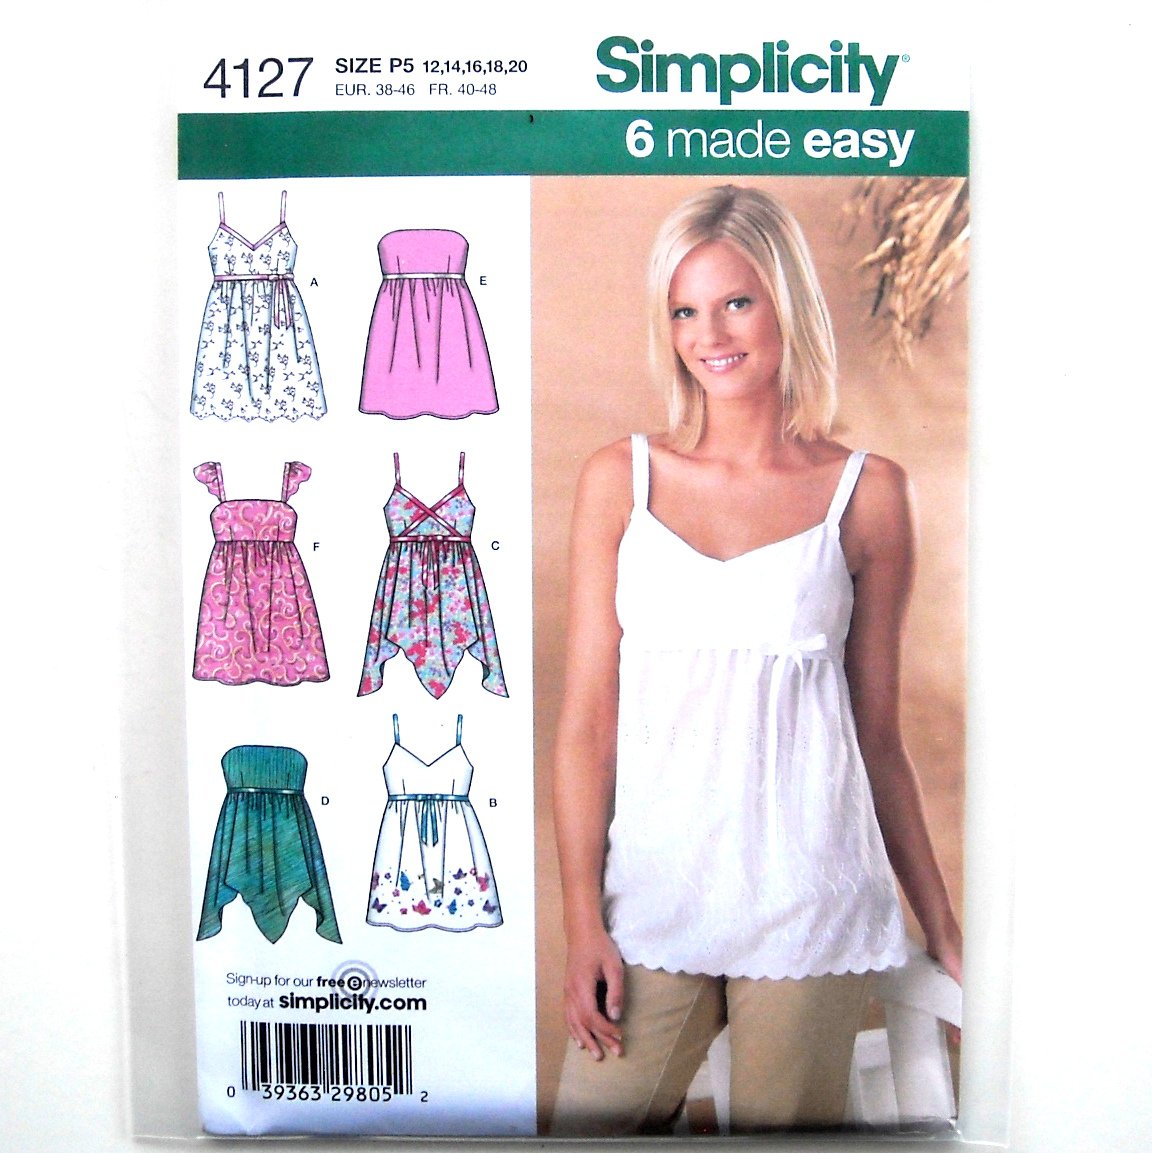 Simplicity Pattern 4127 Size 12 - 20 Six Made Easy Misses Summer Tops